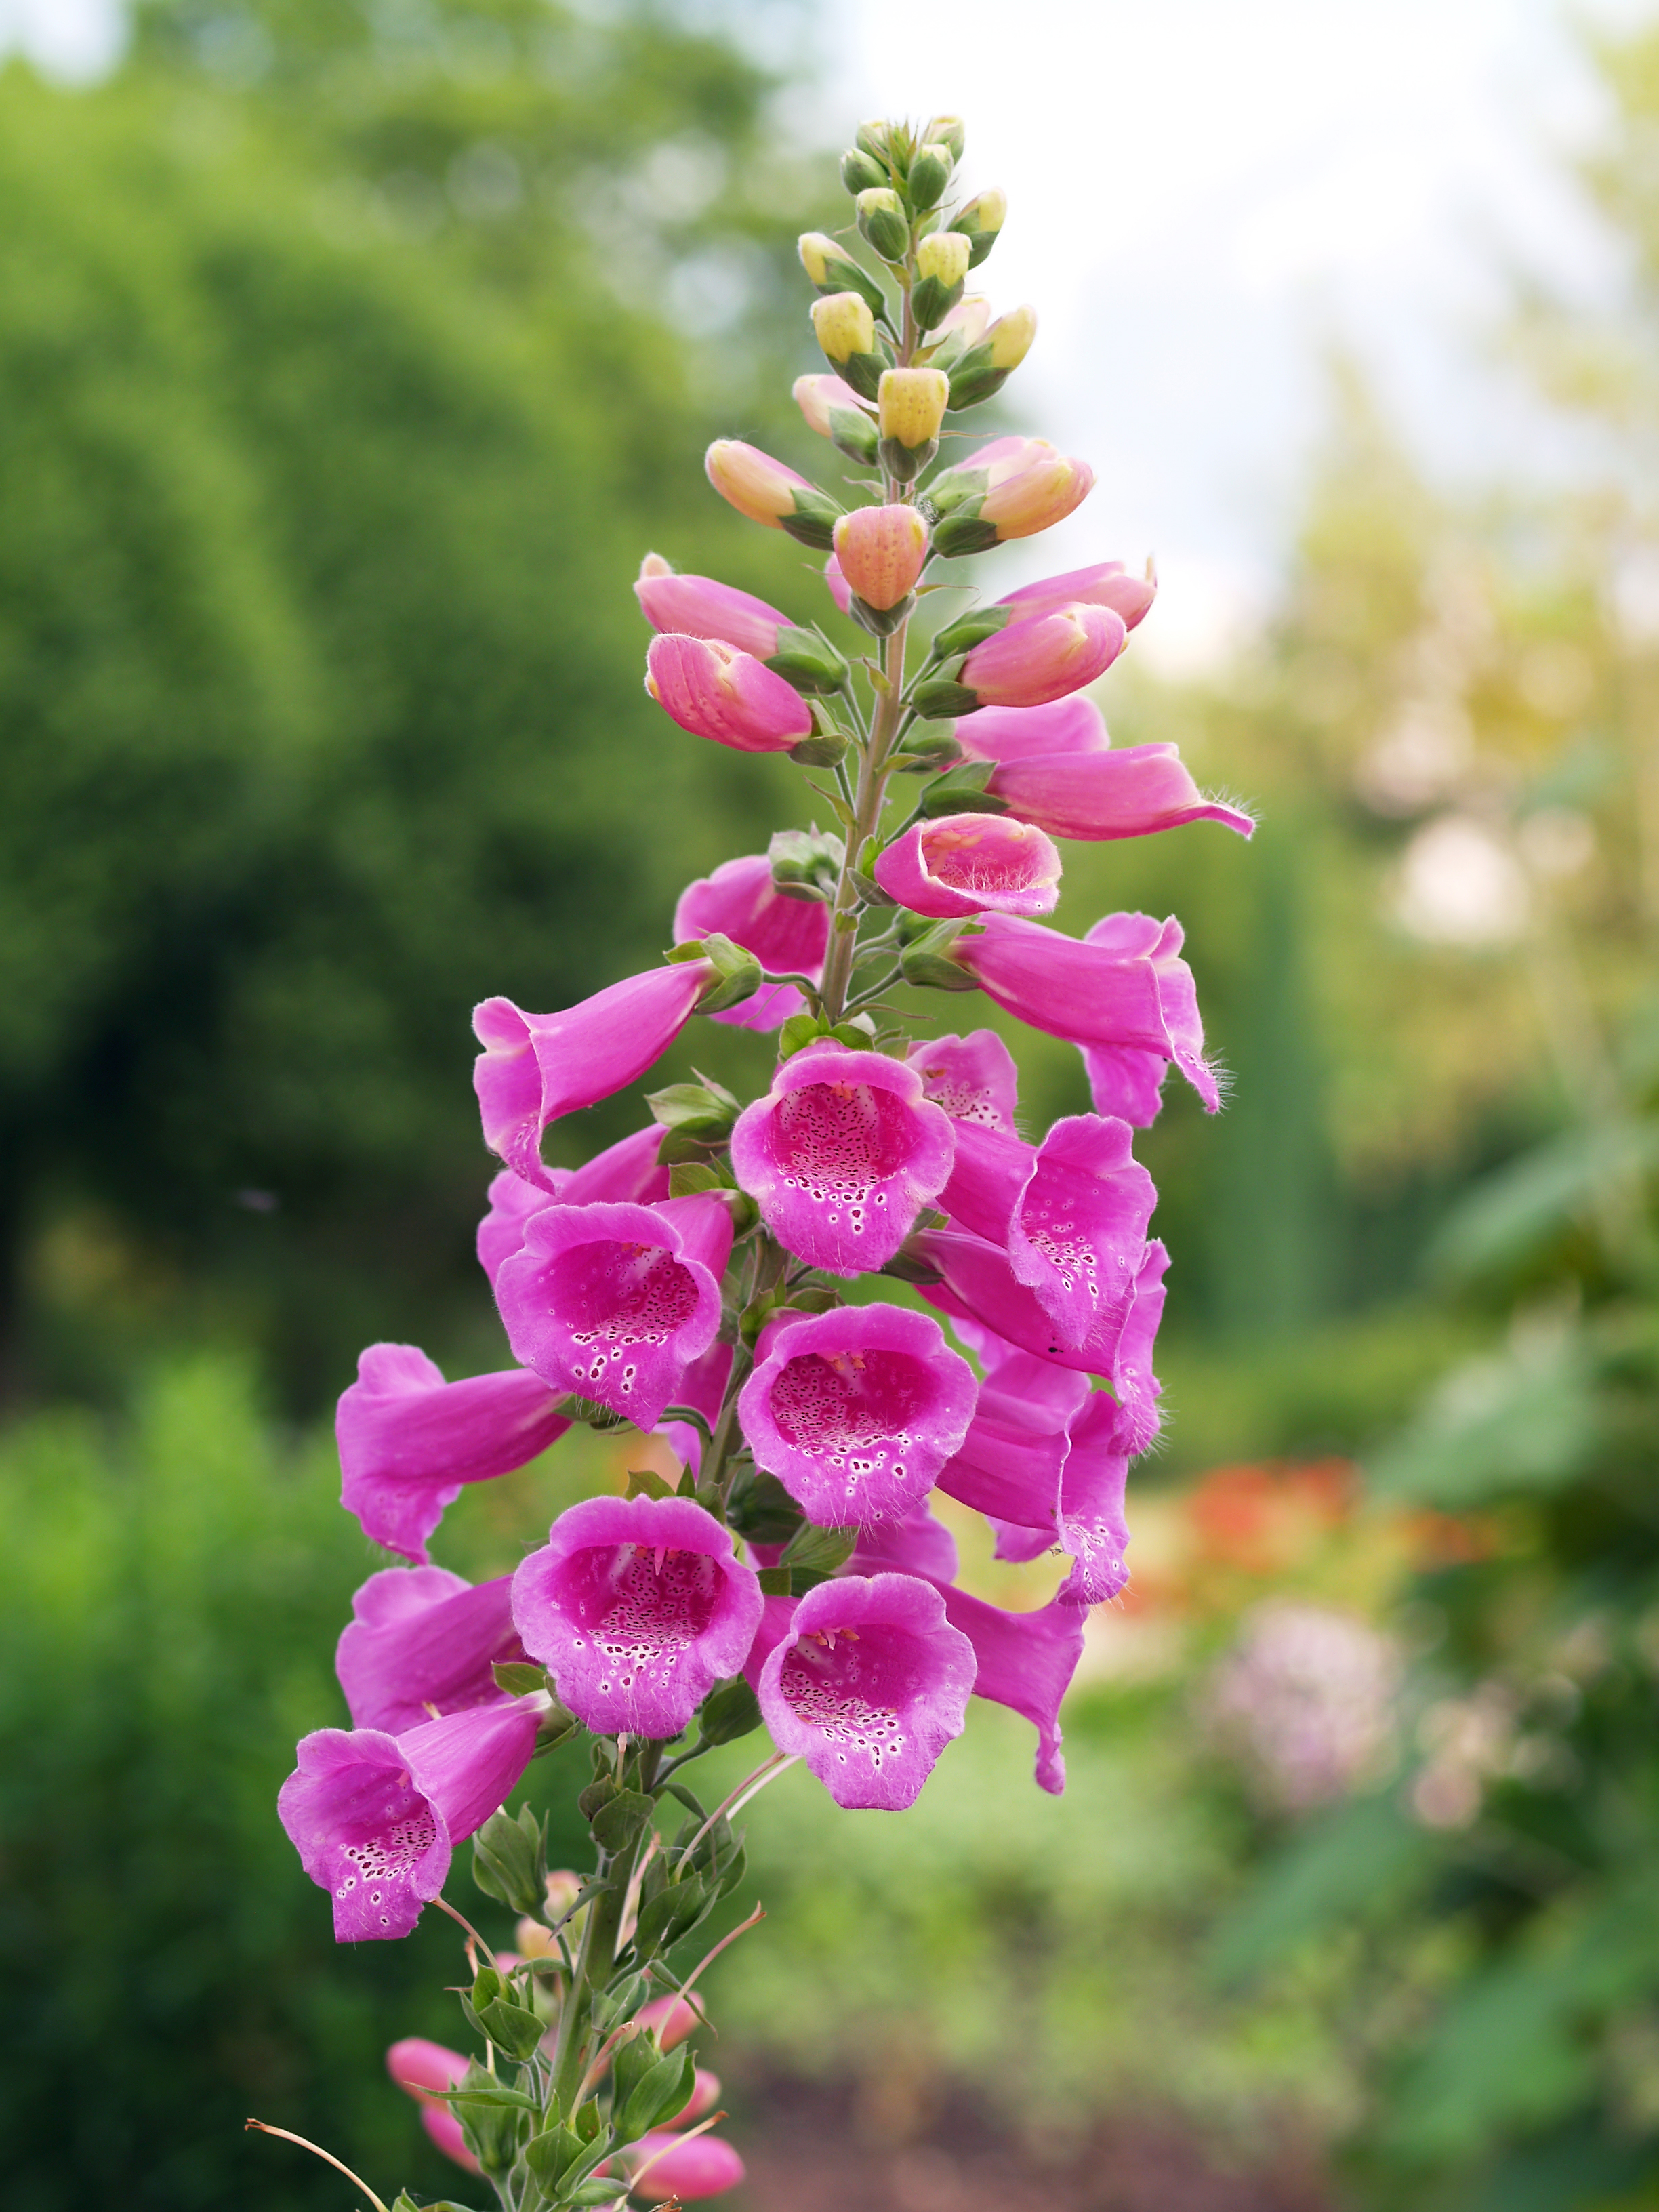 The foxglove plant (Digitalis) is used for heart medicine, but it must be used with caution as it is toxic.